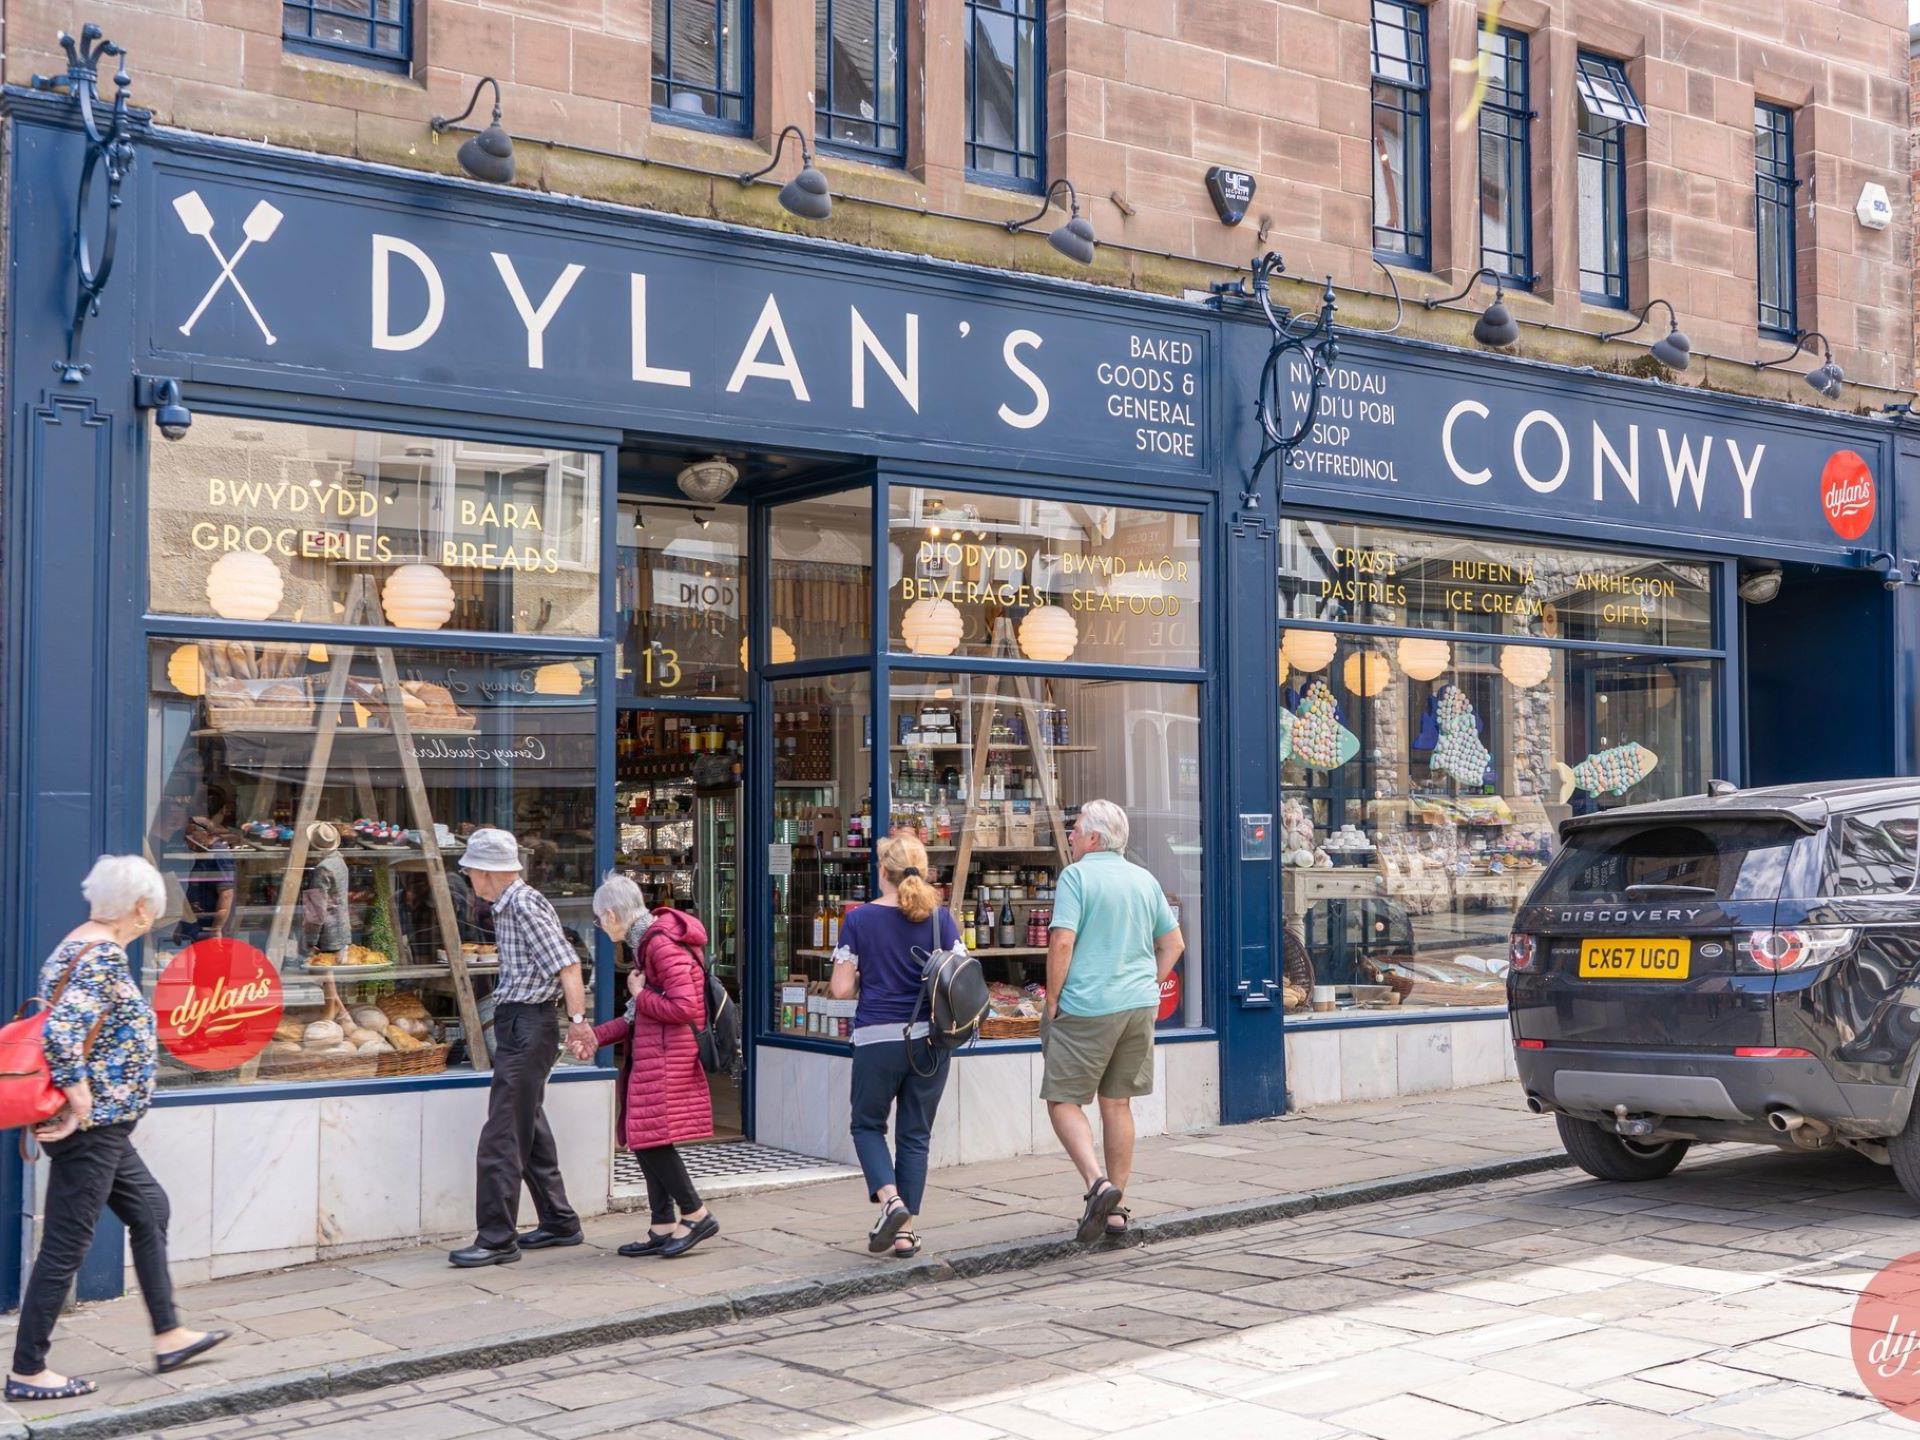 Dylan's Conwy